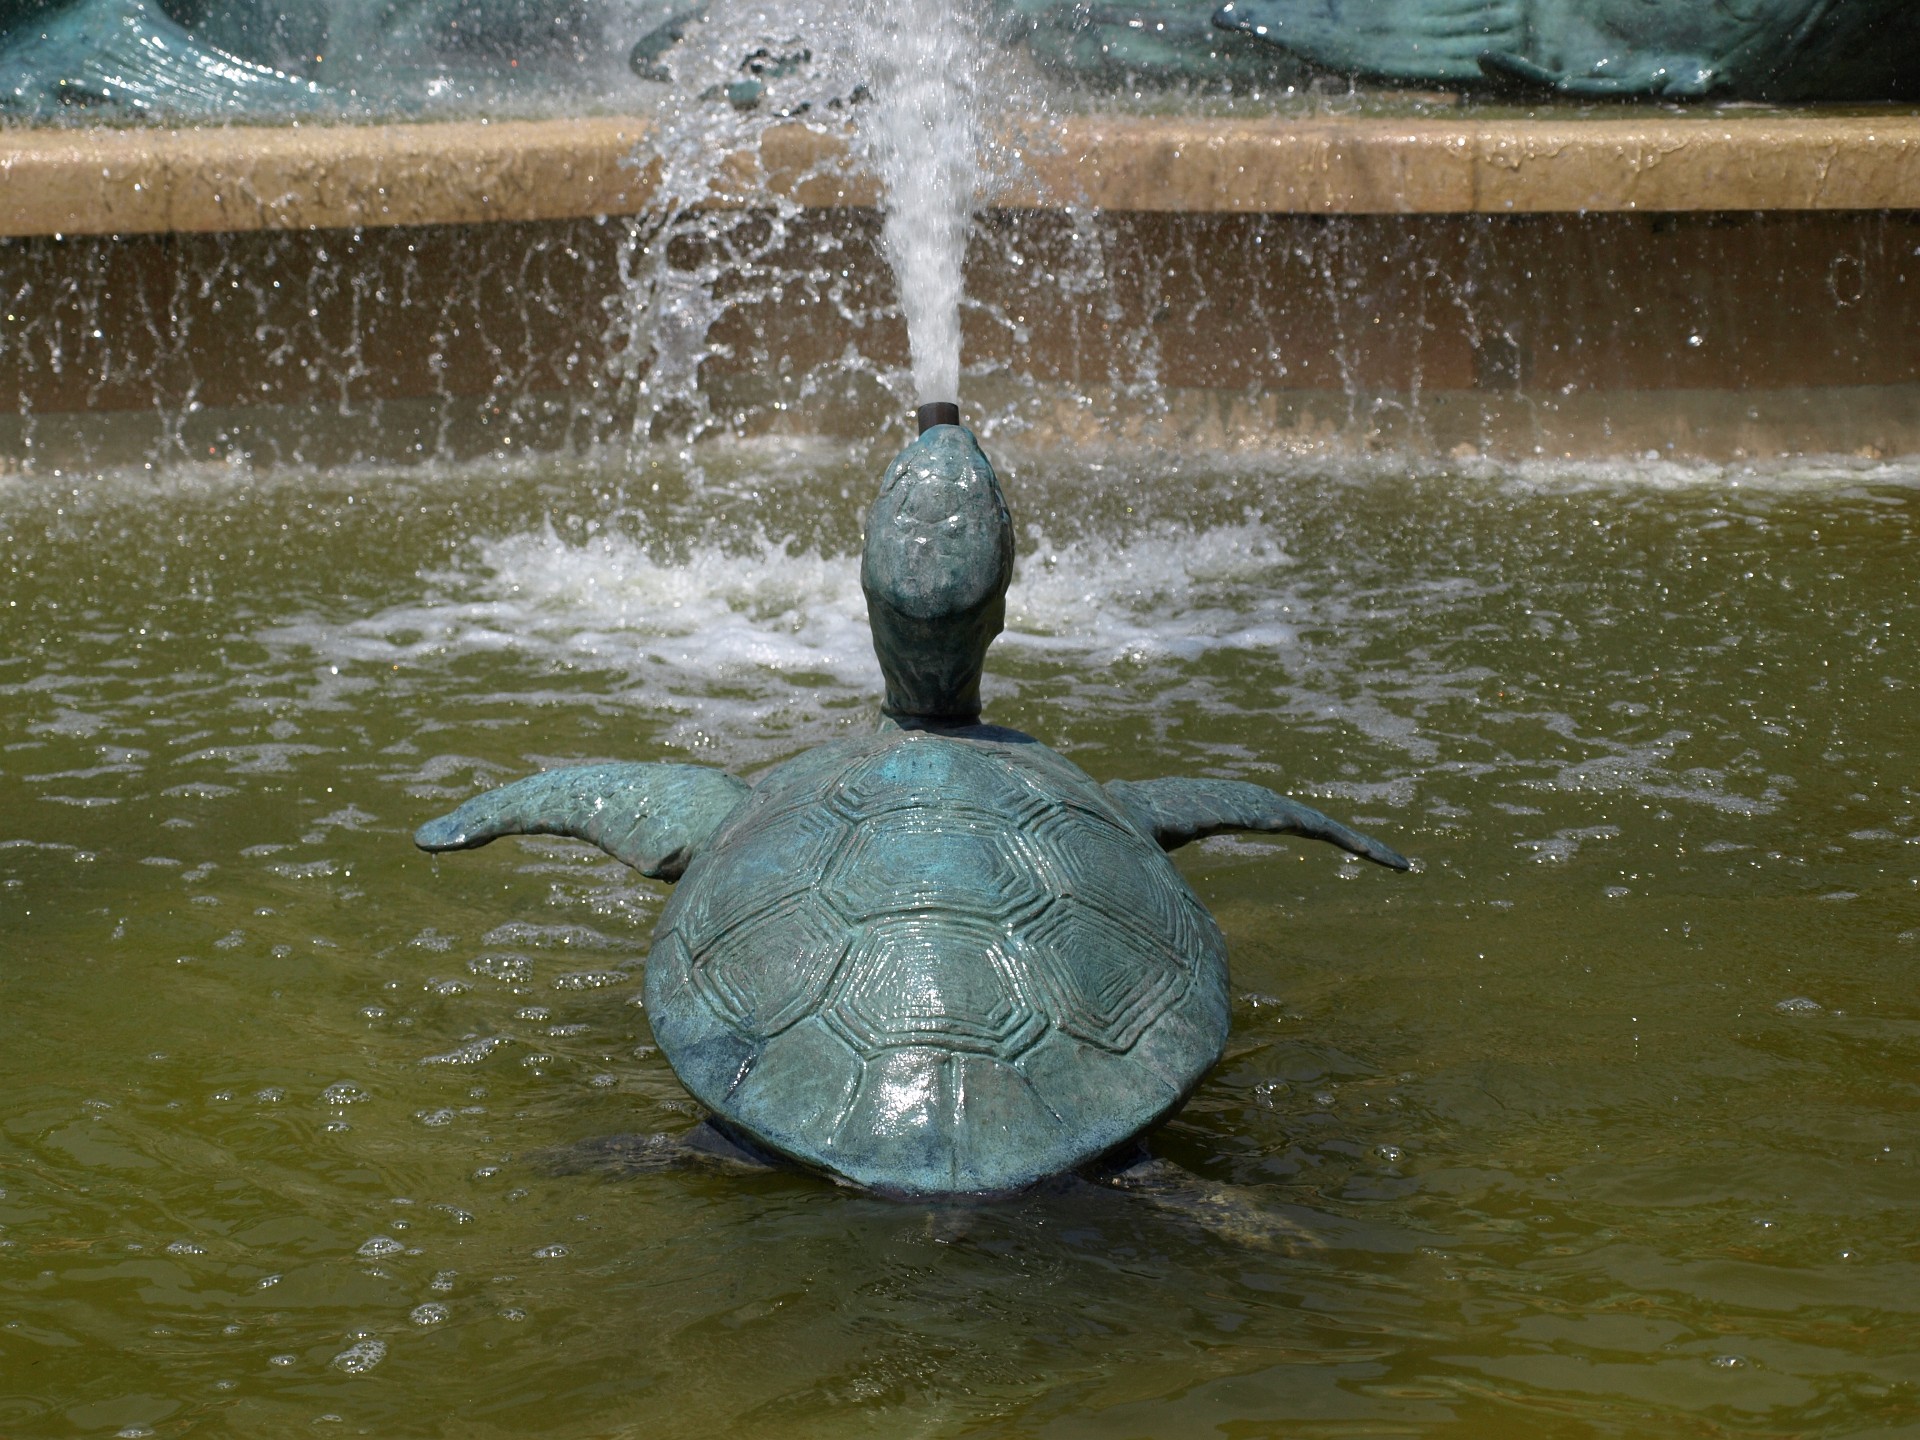 View of the Turtle Spout